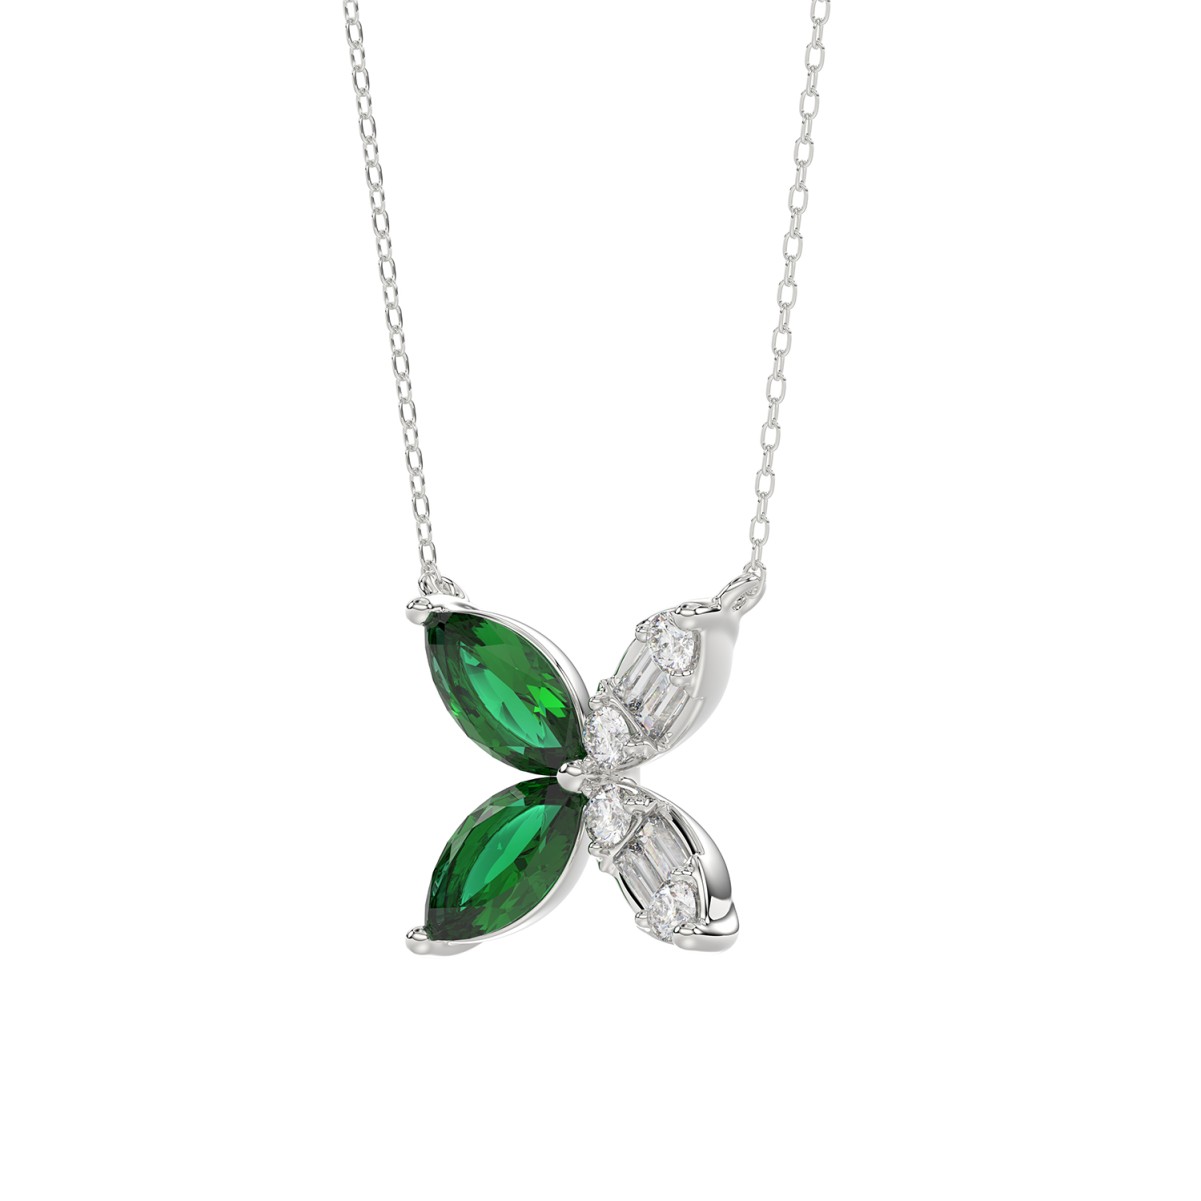 18K WHITE GOLD 1 3/4CT ROUND/BAGUETTE/MARQUISE DIAMOND LADIES PENDANT WITH CHAIN(COLOR STONE MARQUISE GREEN EMERALD DIAMOND 1 5/8CT)